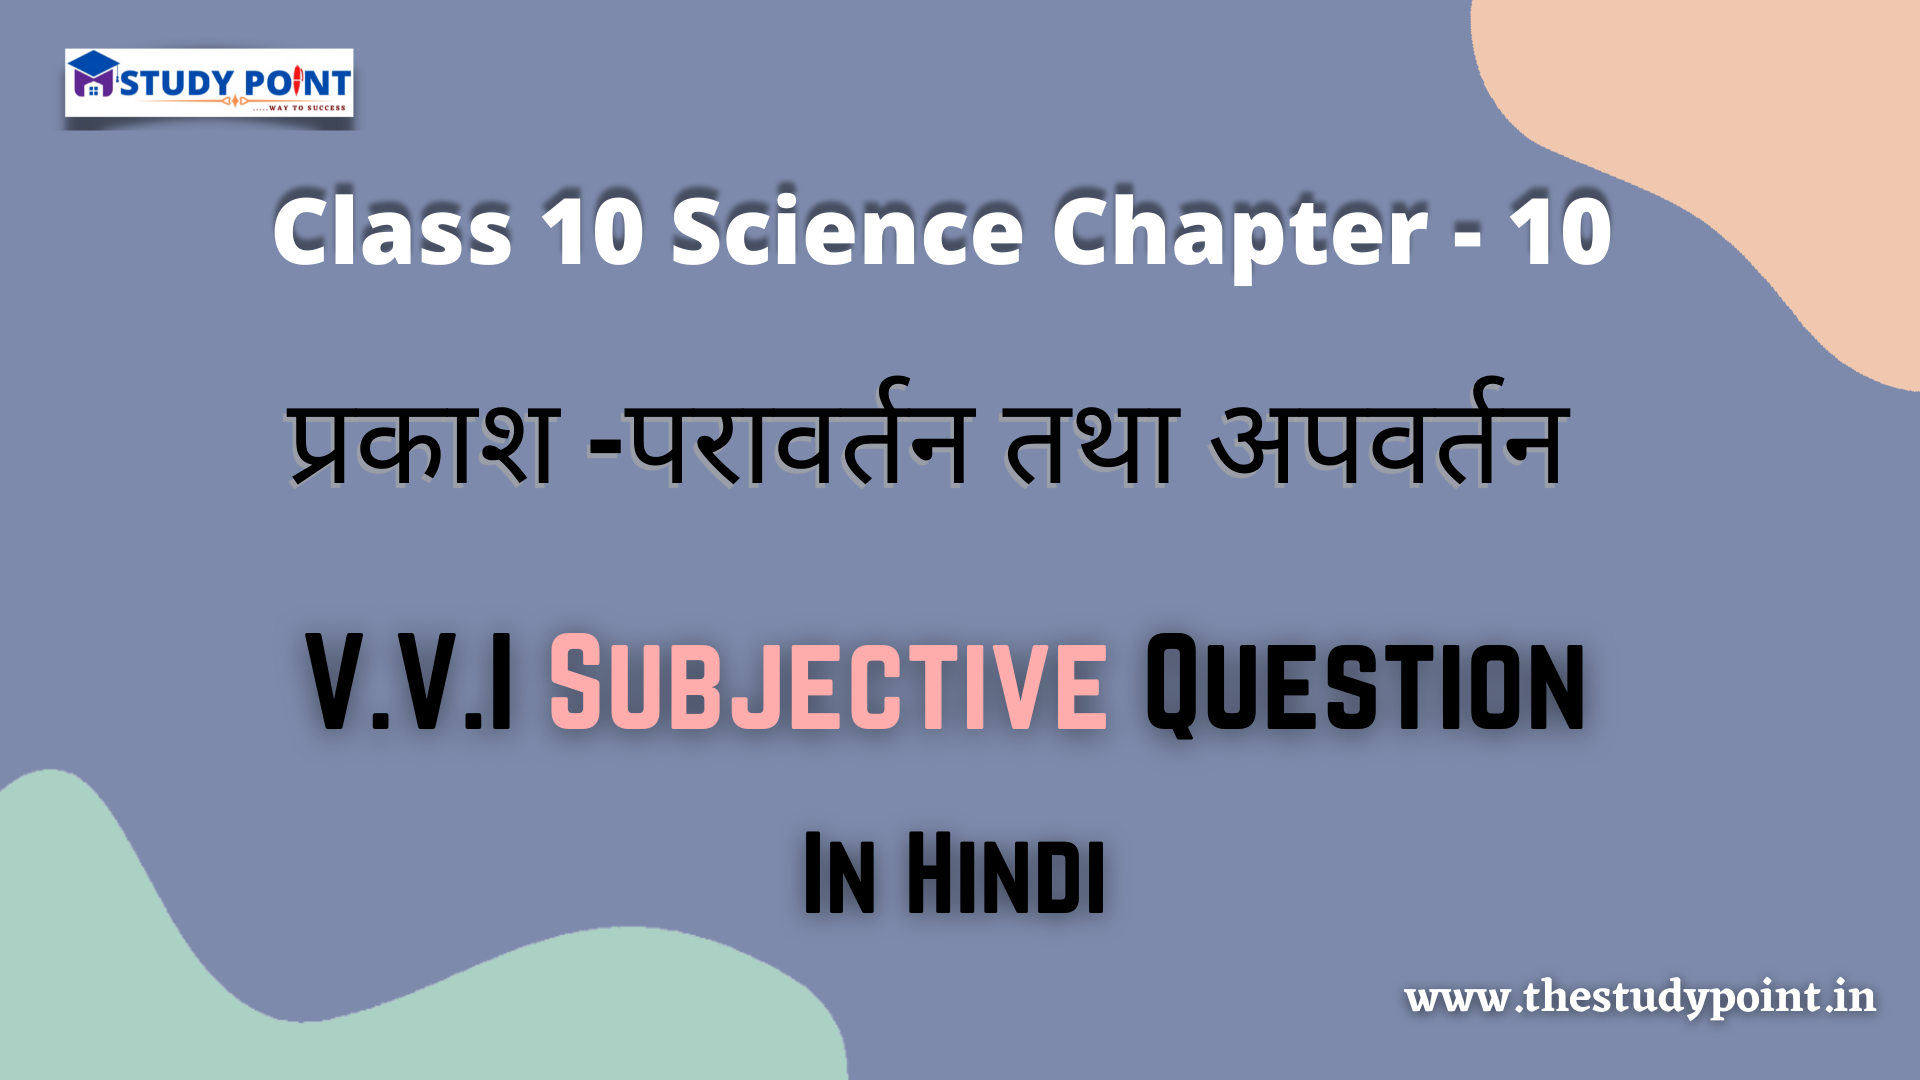 You are currently viewing Class 10 Science Chapter-10 प्रकाश -परावर्तन तथा अपवर्तन V.V.I Subjective Question In Hindi